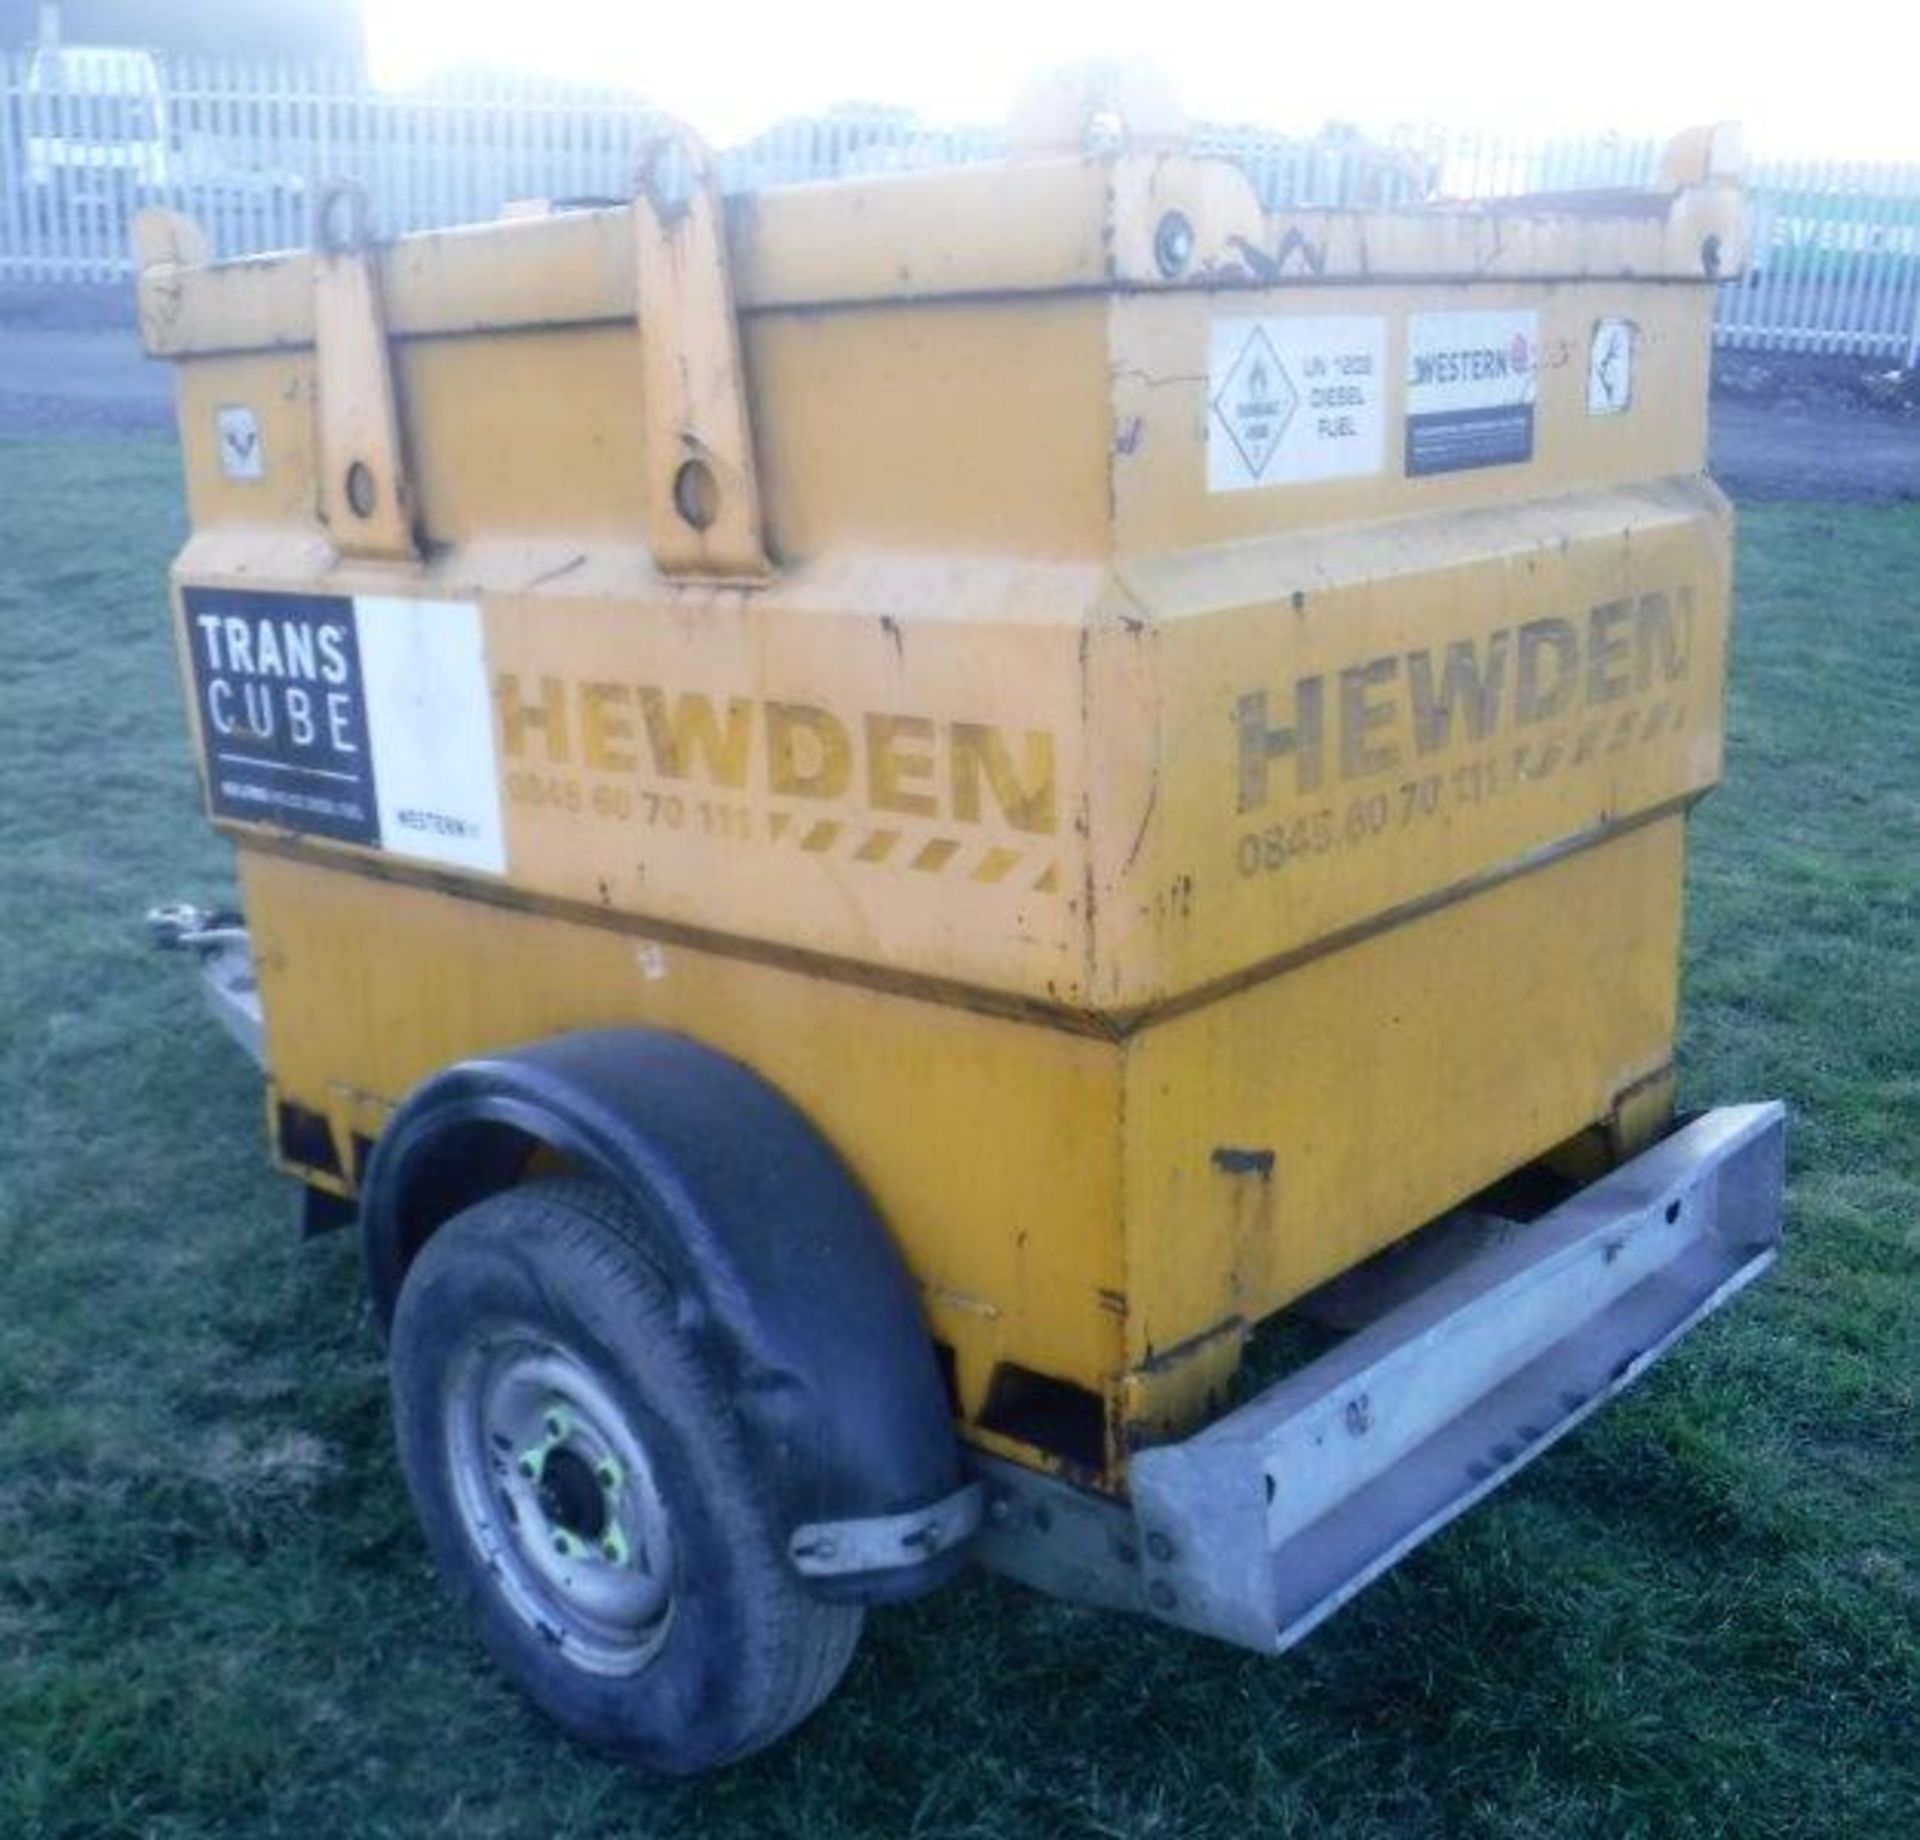 2008 WESTERN fastow 950ltr trans cube fuel bowser S/N 070505413997 (5007607) - Image 11 of 20